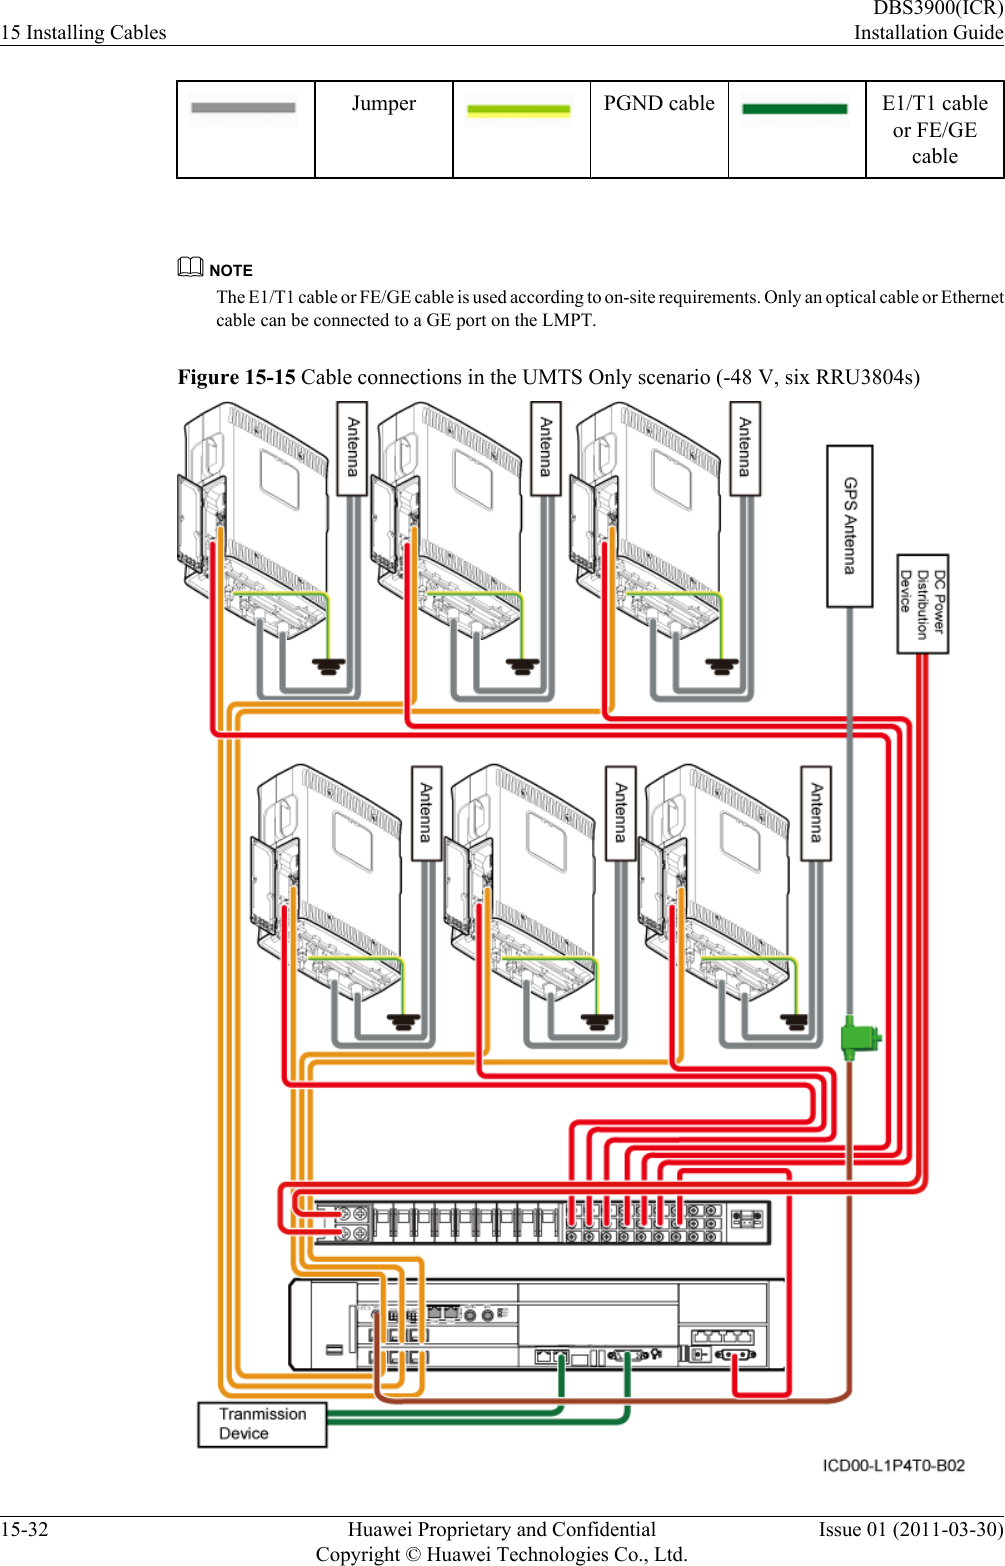 Jumper PGND cable E1/T1 cableor FE/GEcable NOTEThe E1/T1 cable or FE/GE cable is used according to on-site requirements. Only an optical cable or Ethernetcable can be connected to a GE port on the LMPT.Figure 15-15 Cable connections in the UMTS Only scenario (-48 V, six RRU3804s)15 Installing CablesDBS3900(ICR)Installation Guide15-32 Huawei Proprietary and ConfidentialCopyright © Huawei Technologies Co., Ltd.Issue 01 (2011-03-30)